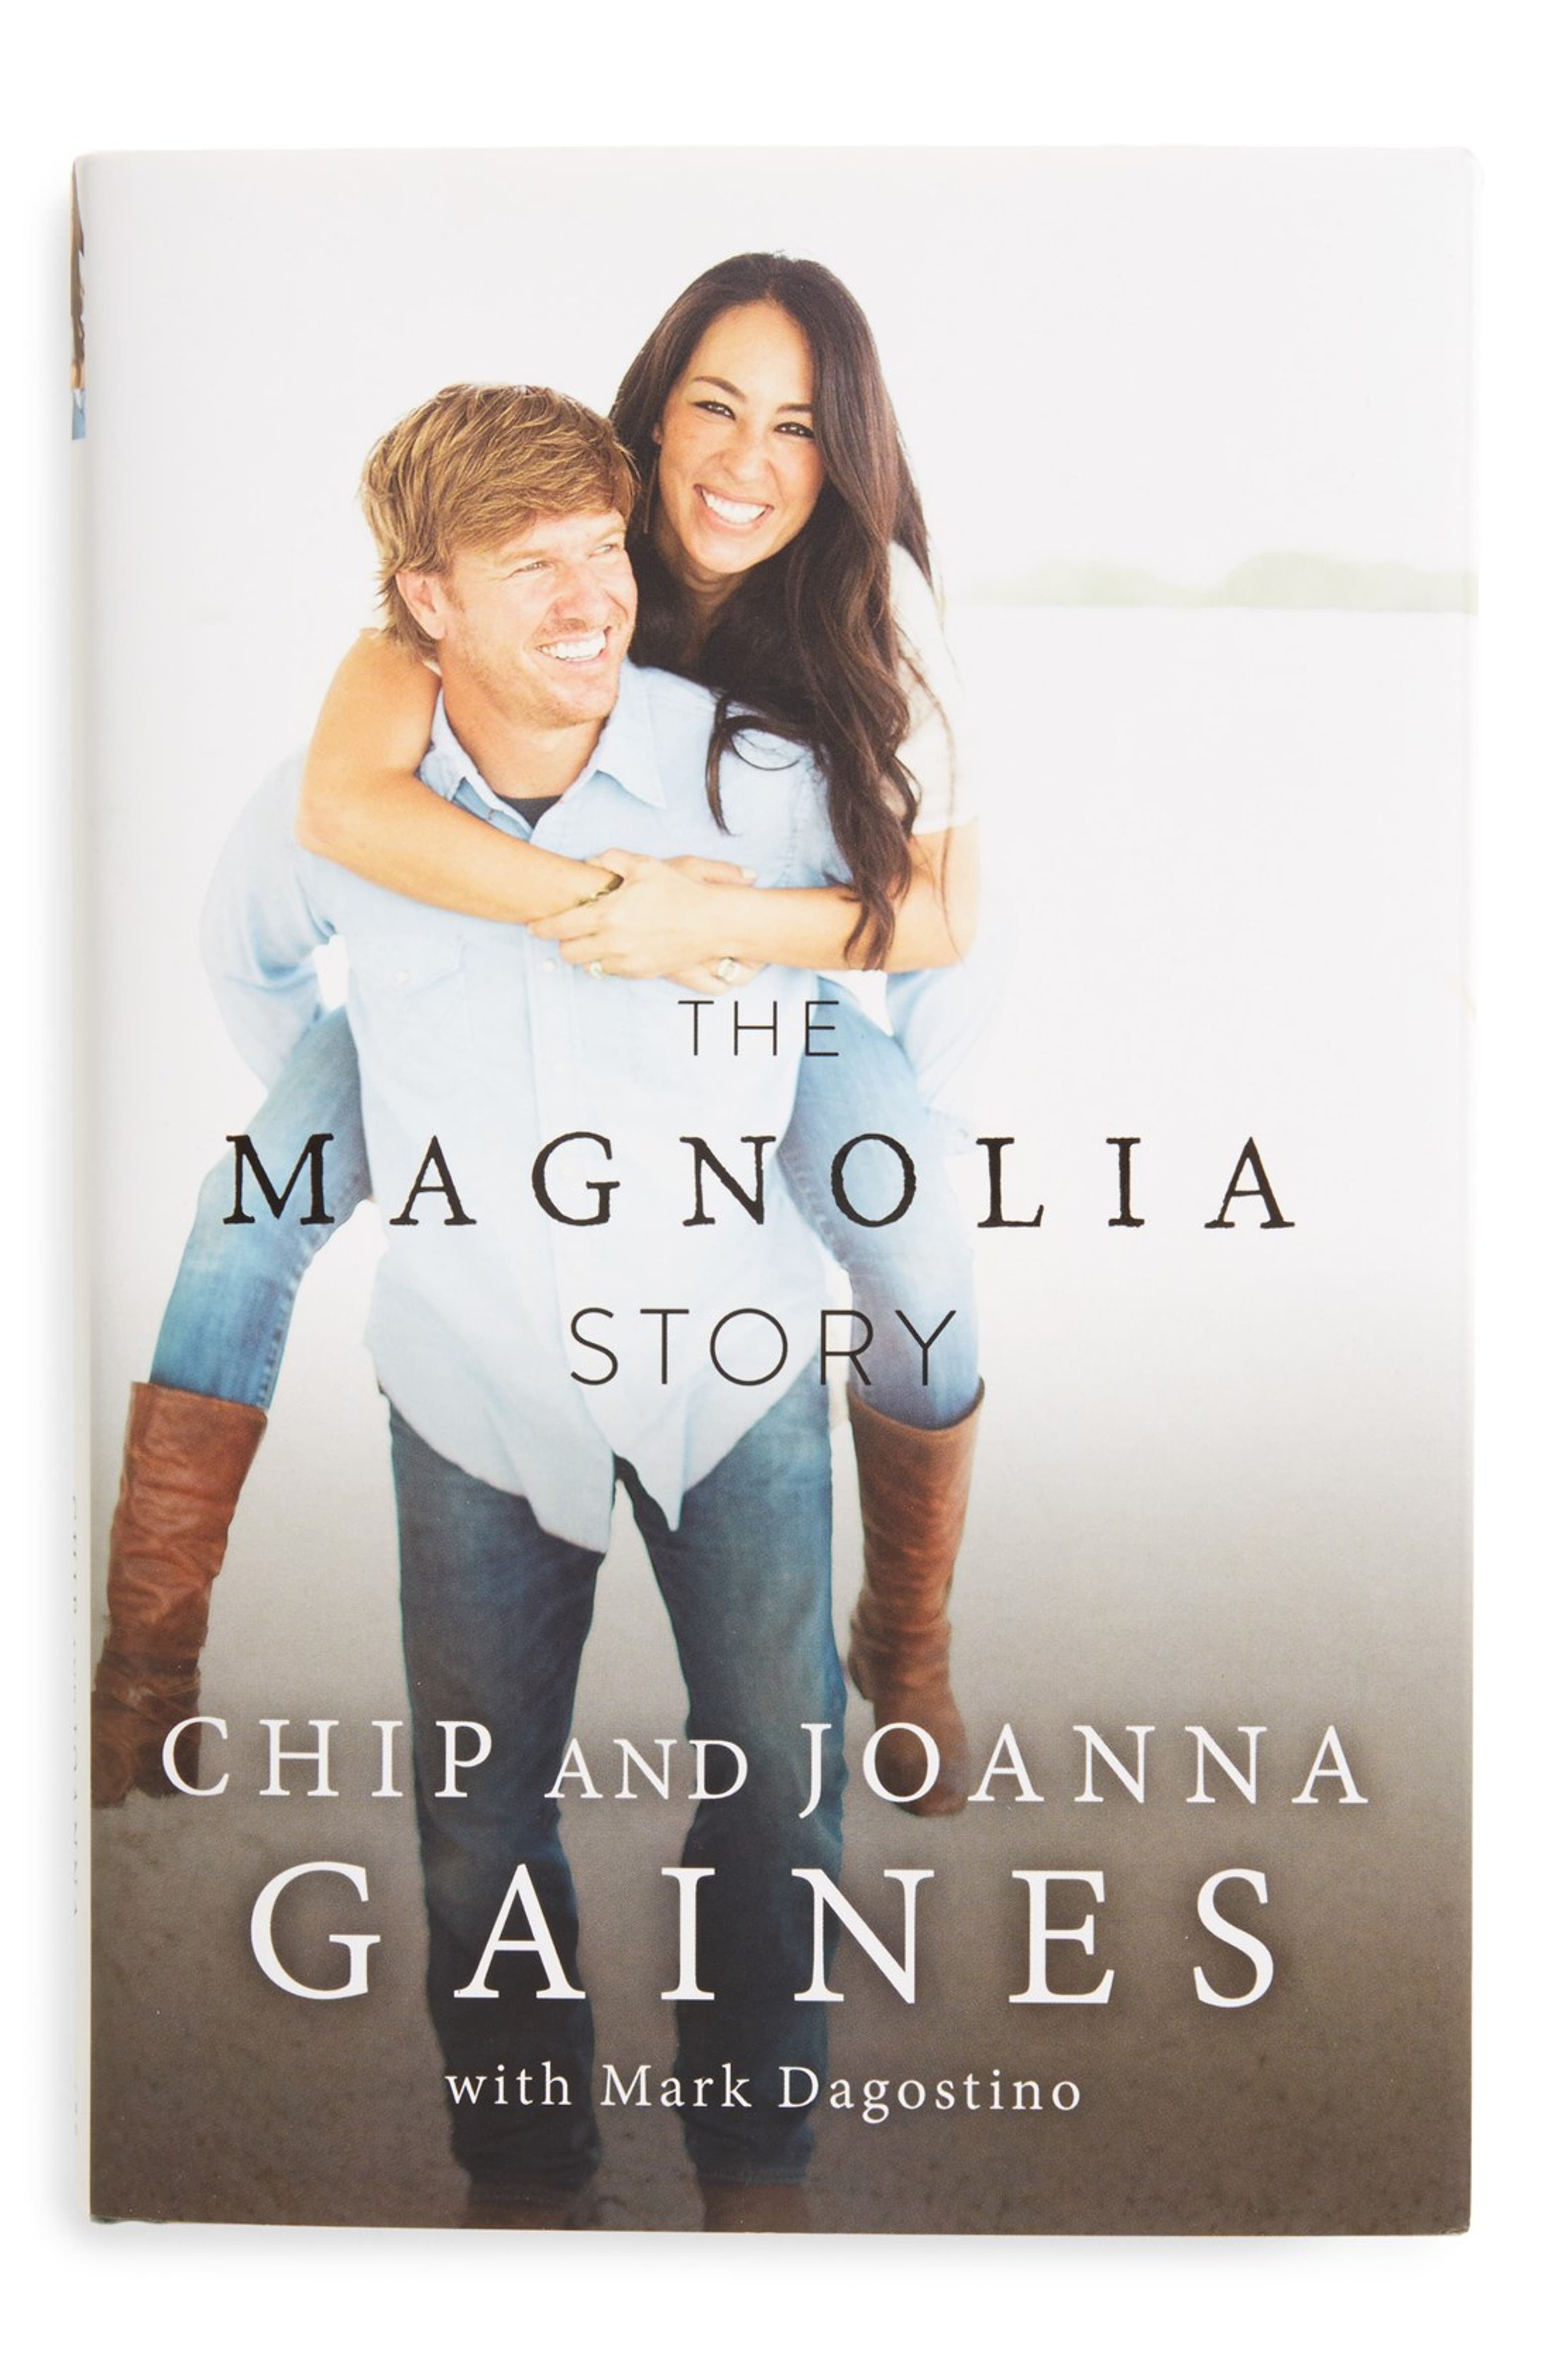 Chip & Joanna Gaines The Magnolia Story Hardcover Book Nordstrom